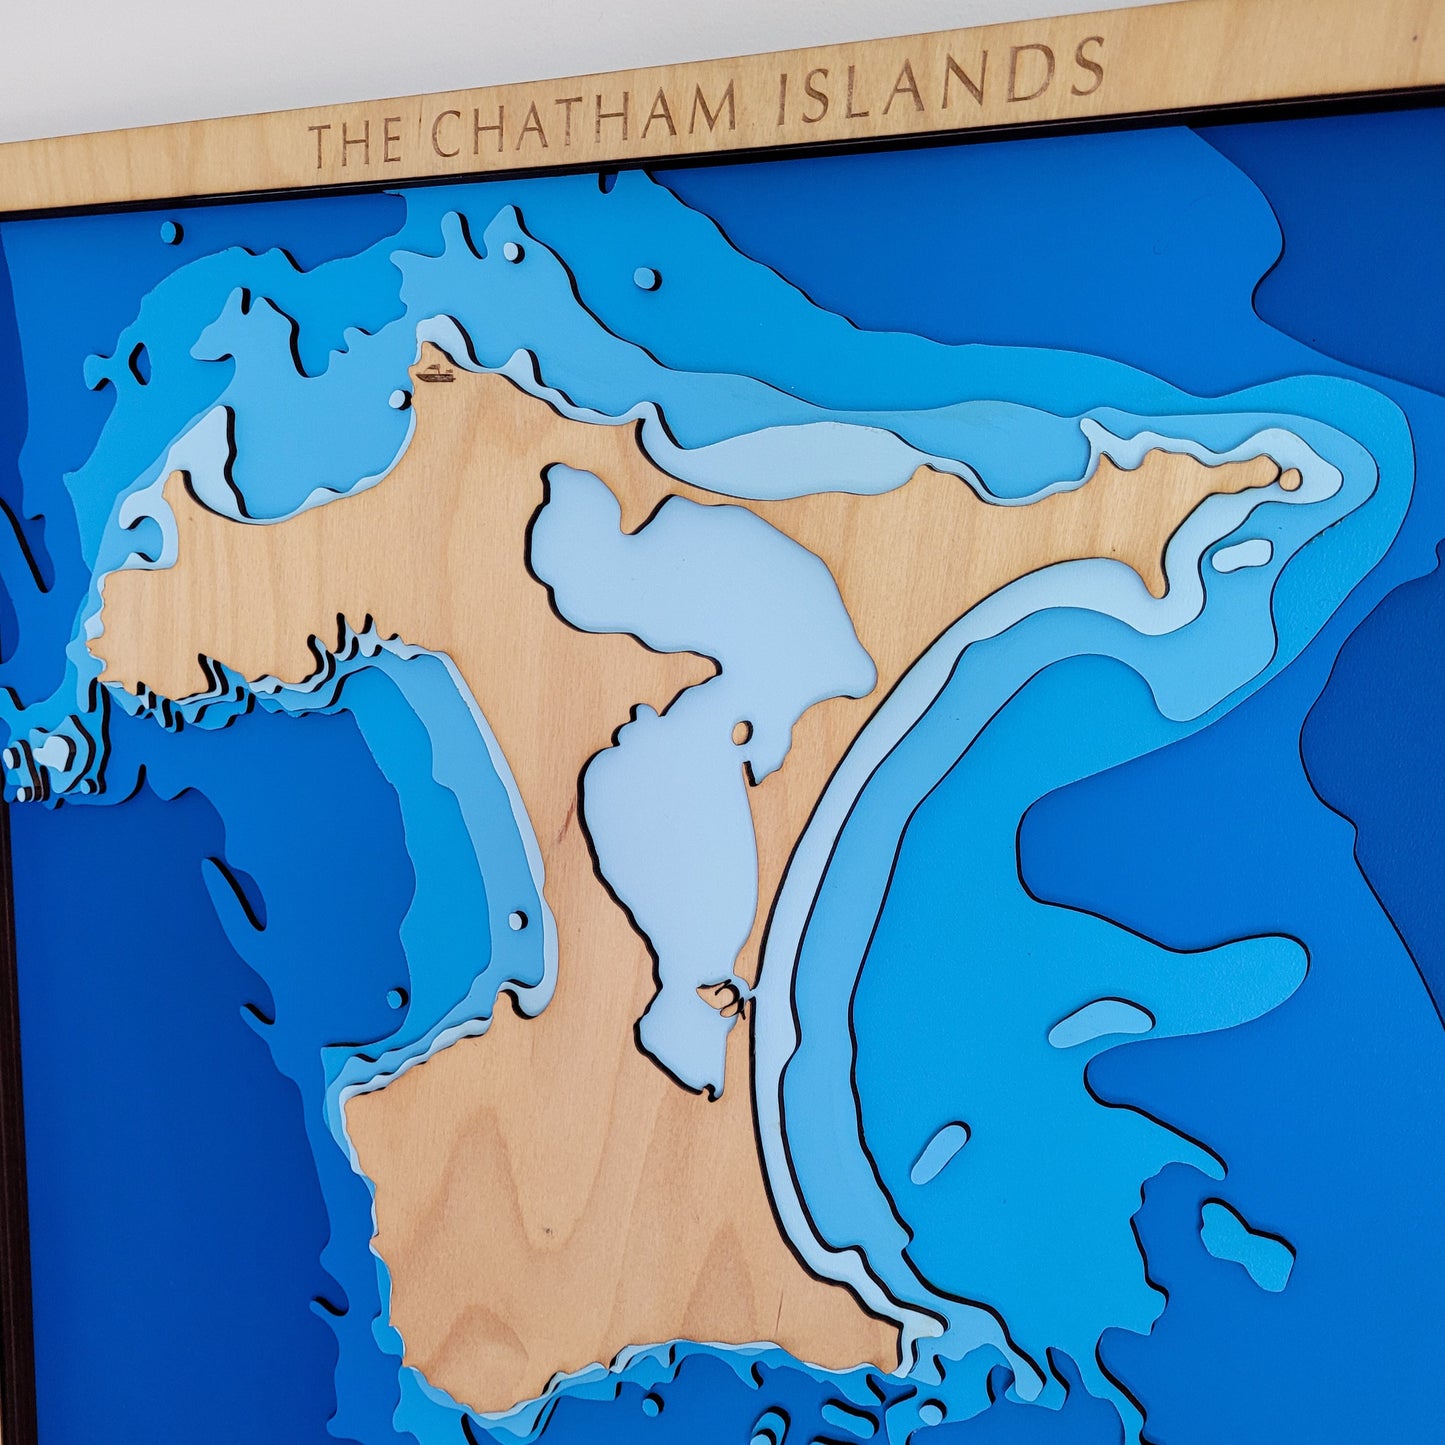 Chatham Islands - Tide's Out Maps